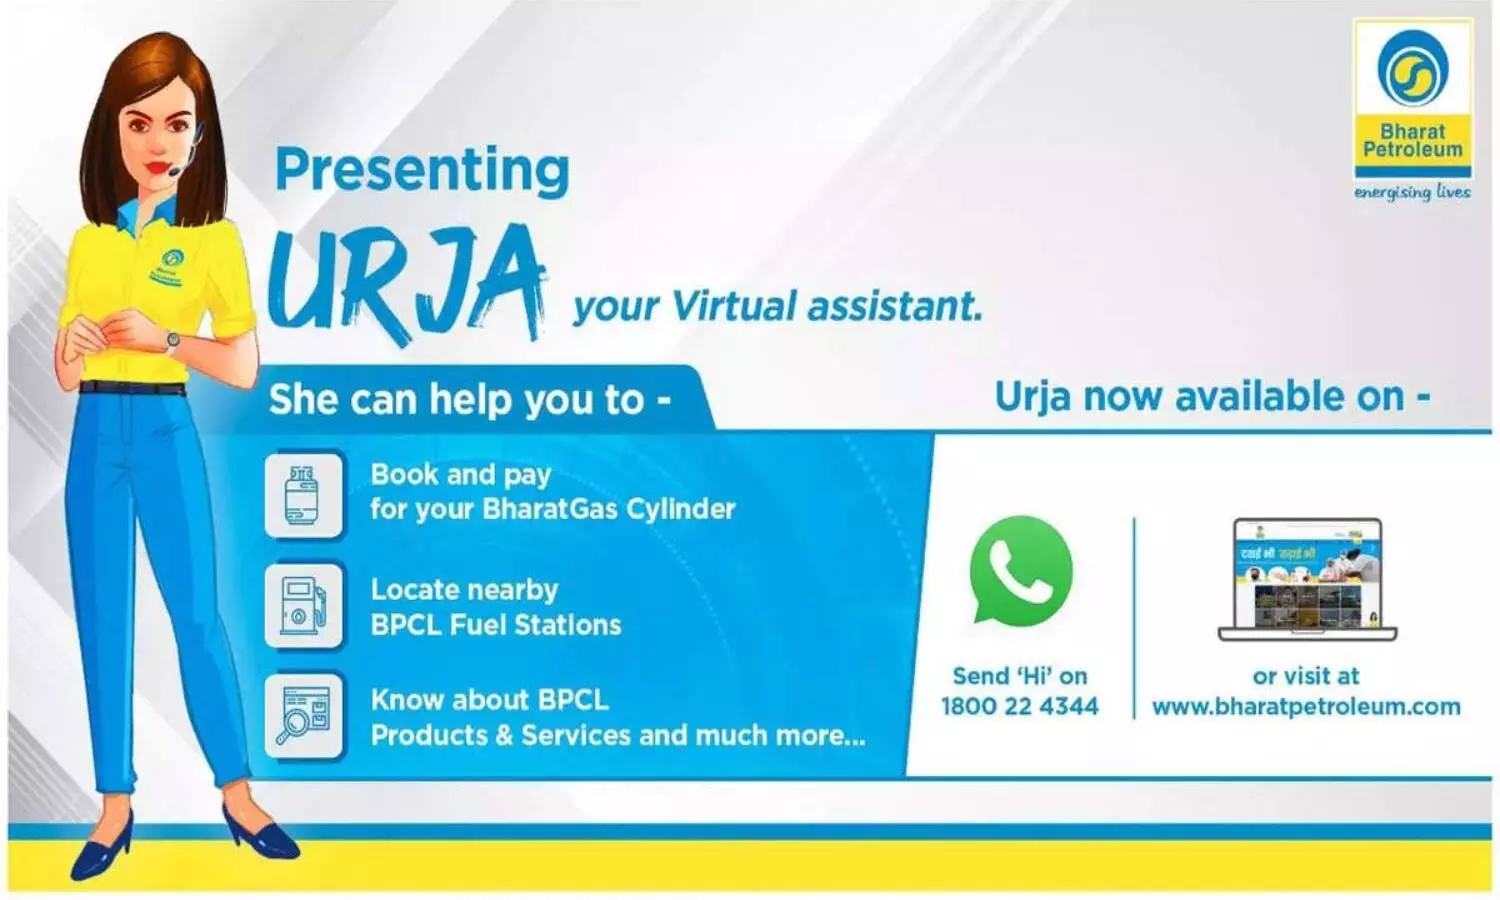 BPCL launches ‘Urja’, an AI Chatbot to aid customers